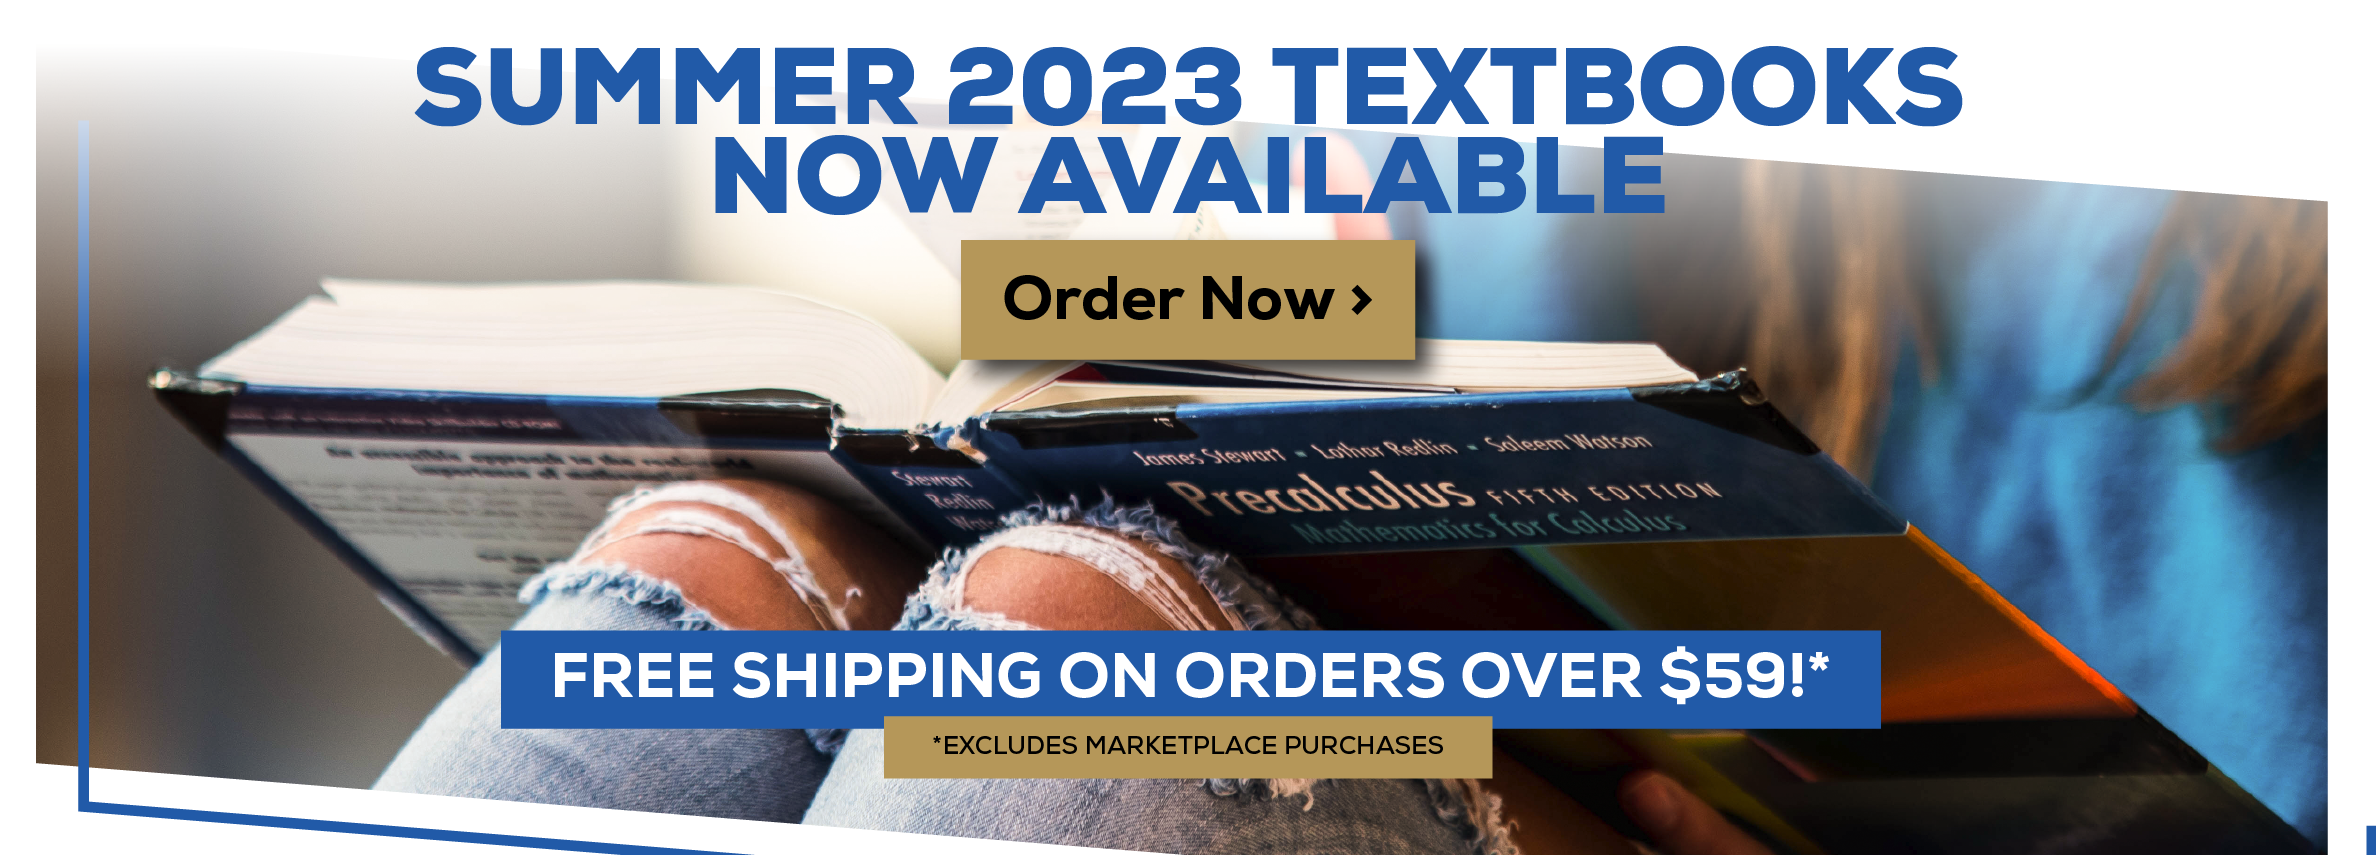 Summer 2023 Textbooks now available. order now. free shipping on all orders over $59!* *Excludes Marketplace Purchases